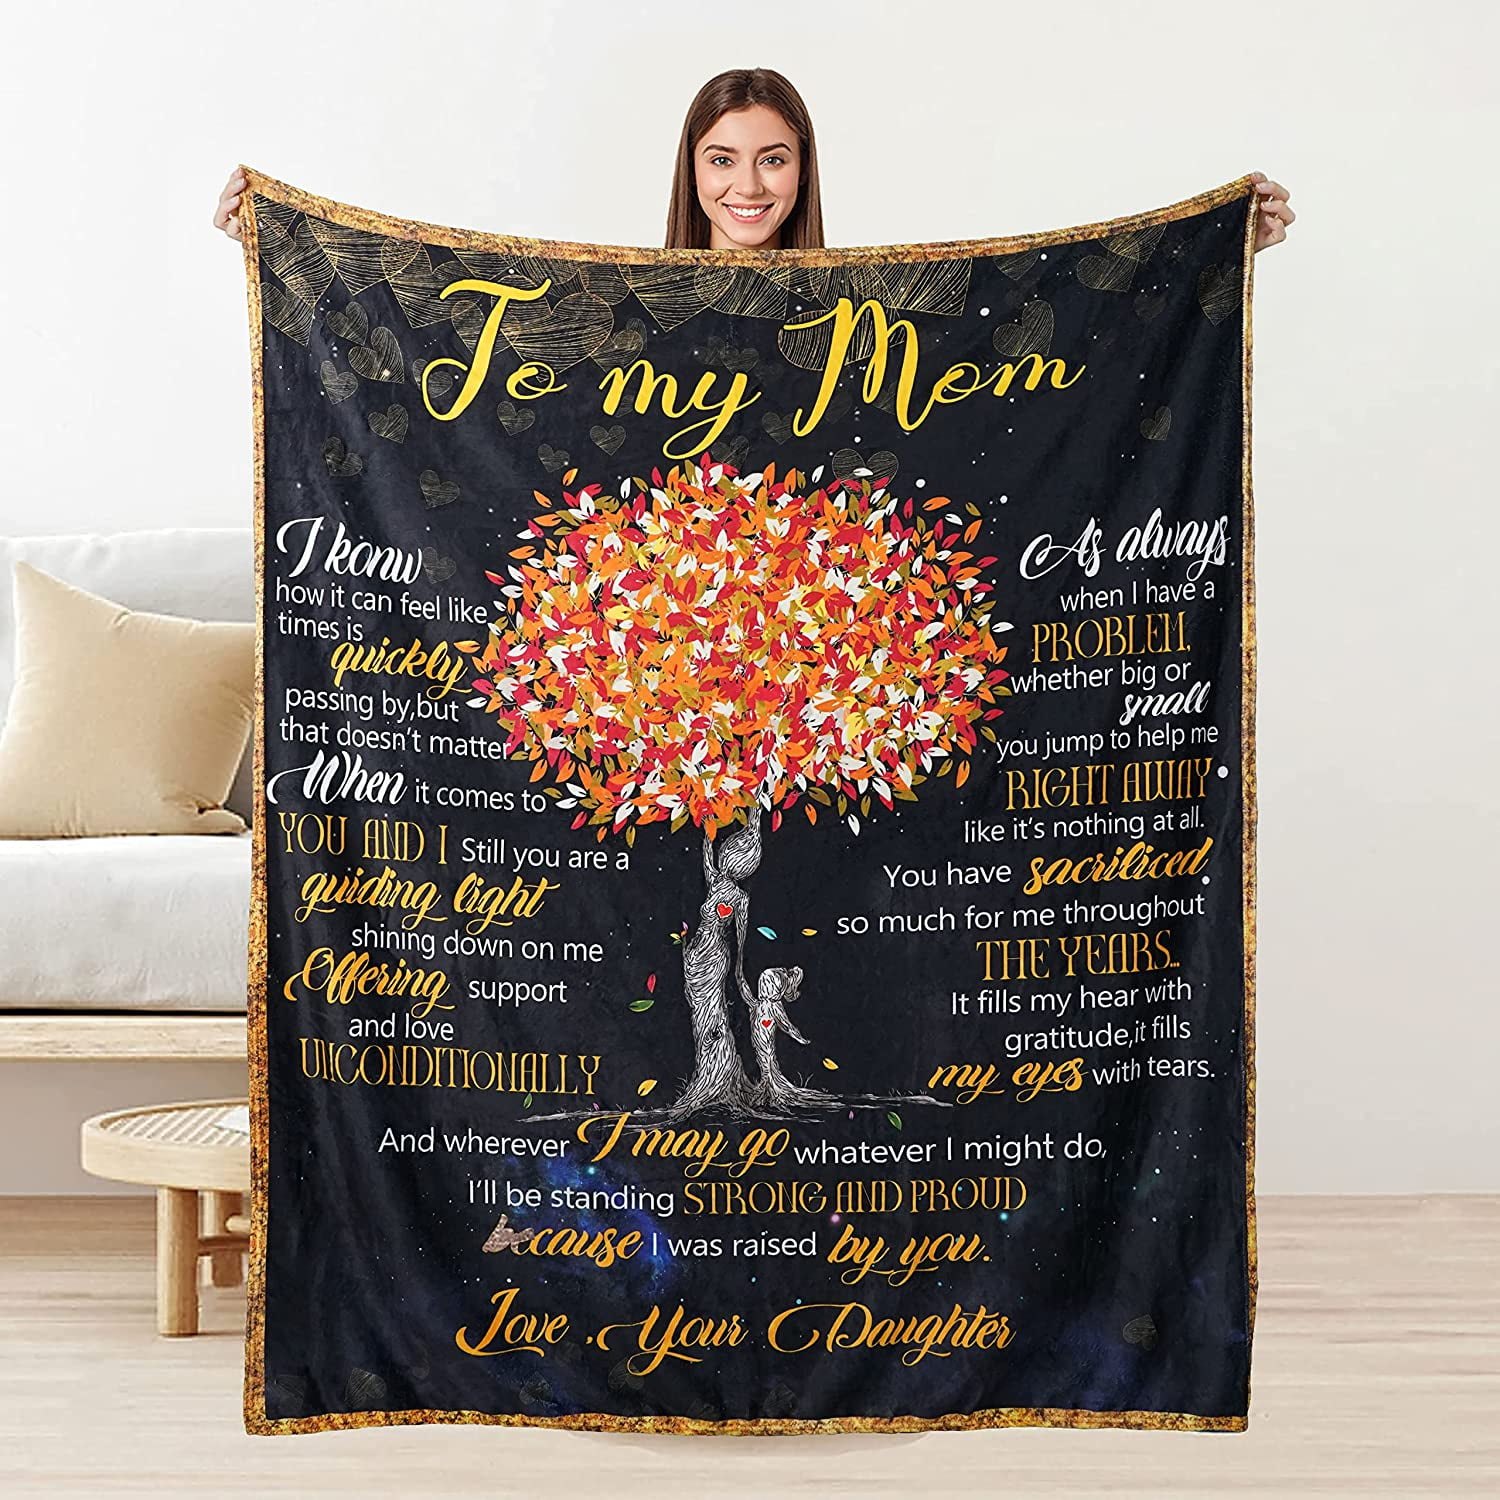 Mom Blanket, Christmas Gifts for Mom, Mom Gifts for Christmas from Daughter  or Son, Snuggly Soft Cozy Throw Blankets Filled with Gratitude, Mothers